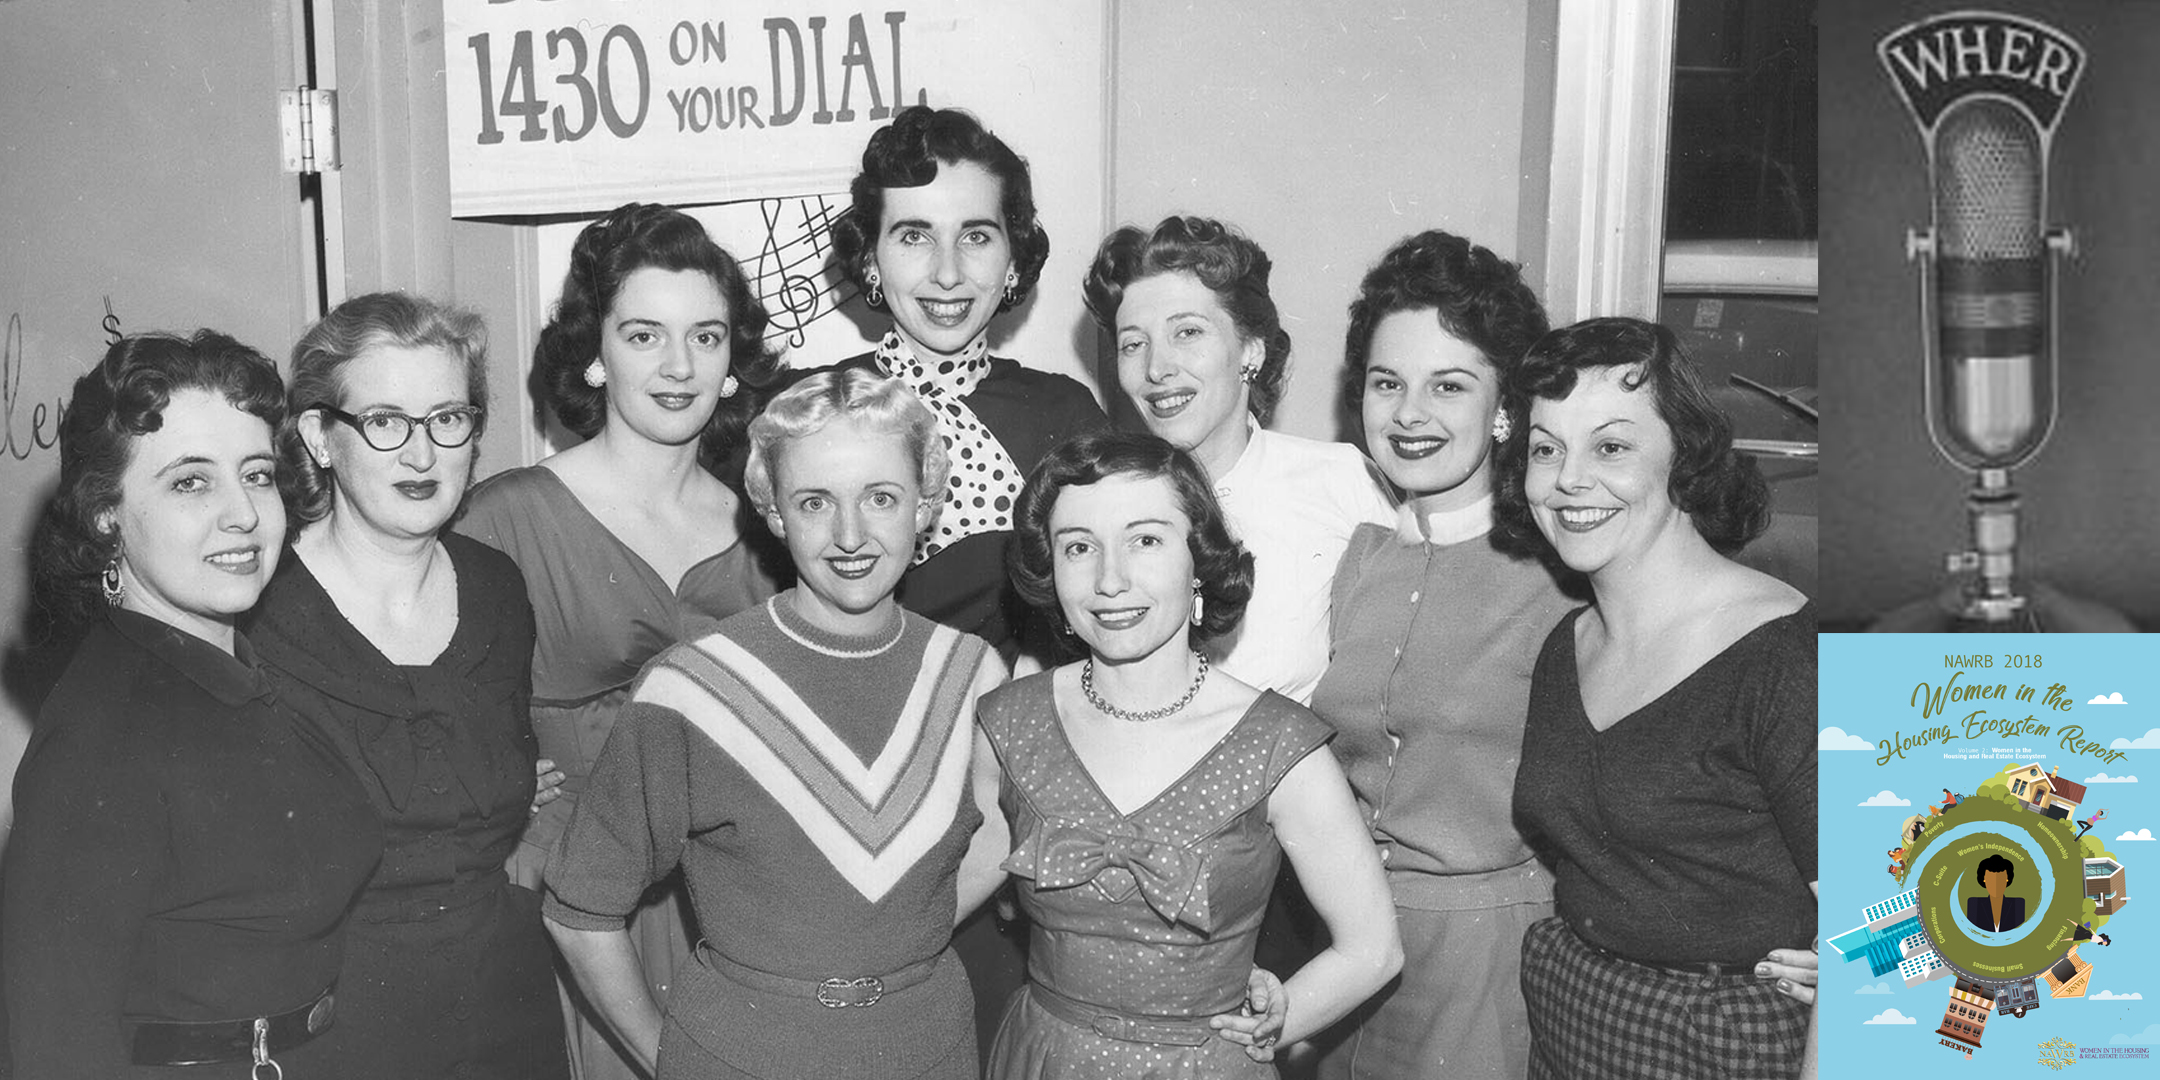 WHER: First All-Woman Radio Station in the 1950s - NAWRB